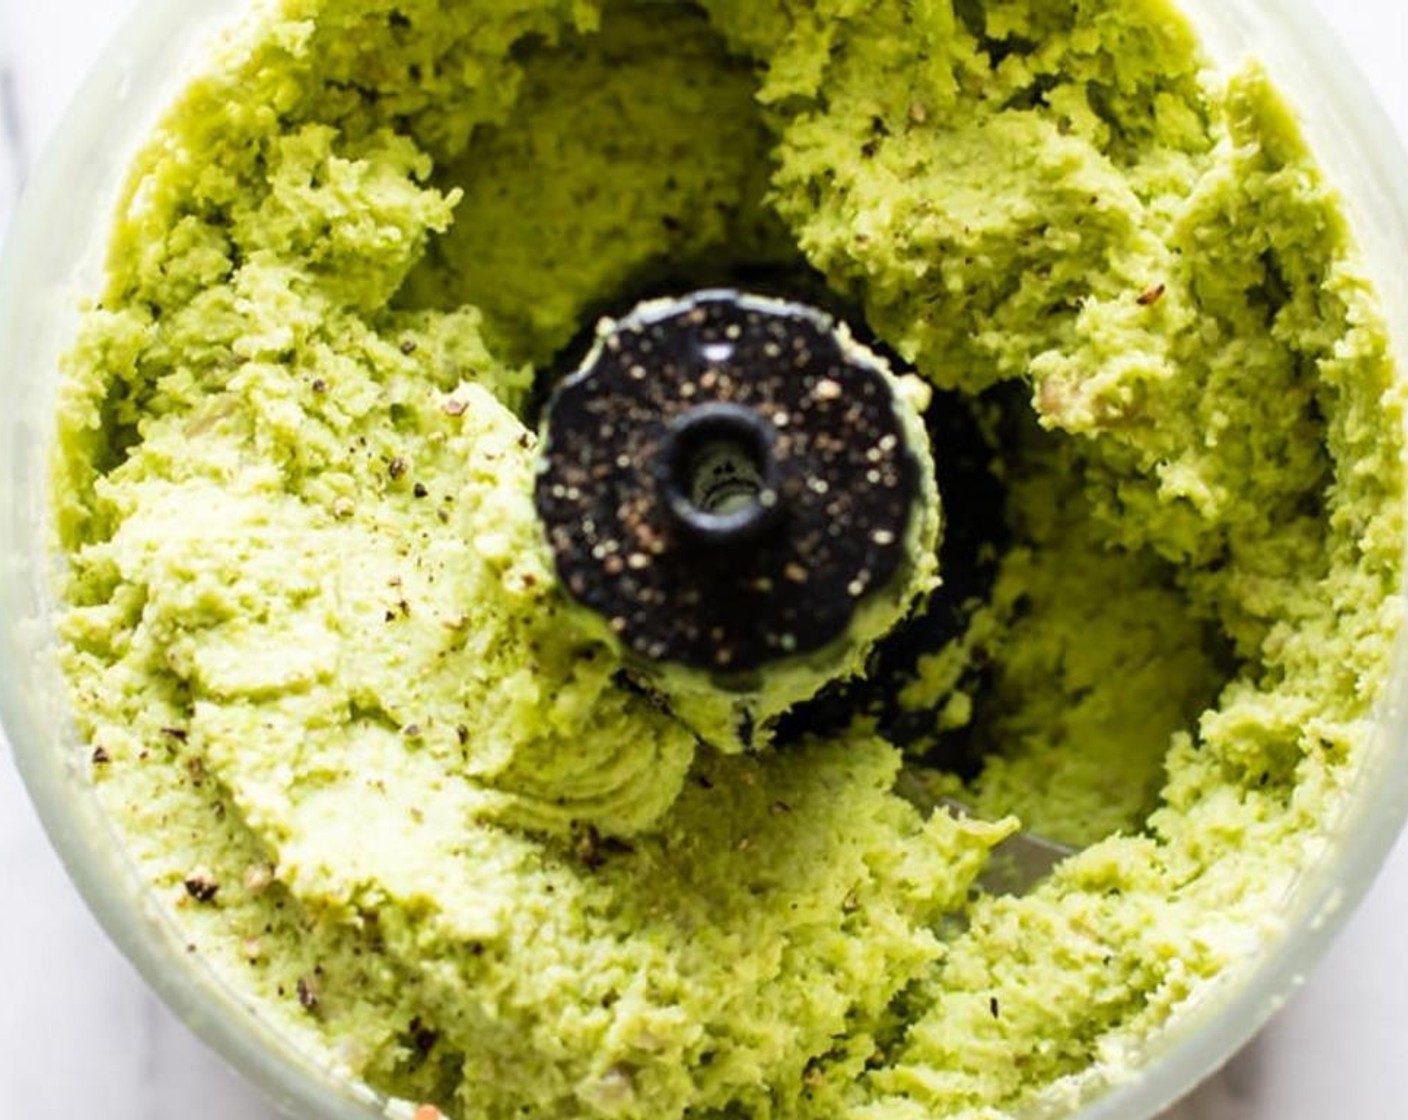 step 2 Combine your edamame, Sunflower Seeds (1/4 cup), and Garlic (1 clove) in a food processor. Blend then add Olive Oil (3 Tbsp), juice from Lemon (1), Sea Salt (to taste), and Ground Black Pepper (to taste). Blend again until thick pesto is formed.